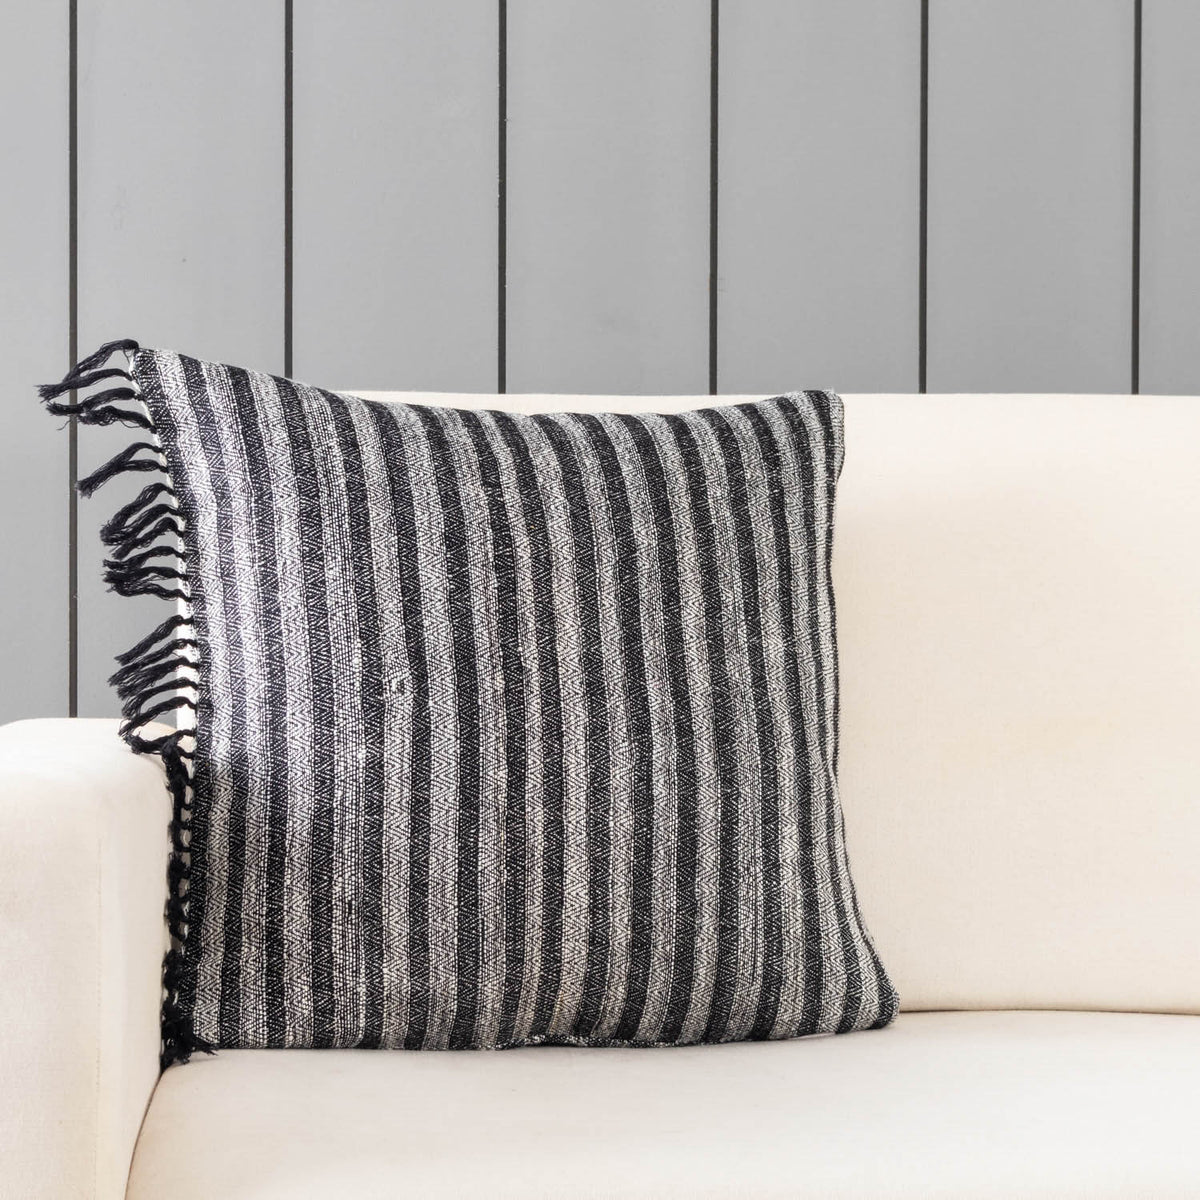 Handwoven Upcycled Black & White Wool & Oak Silk Cushion Cover - 18x18